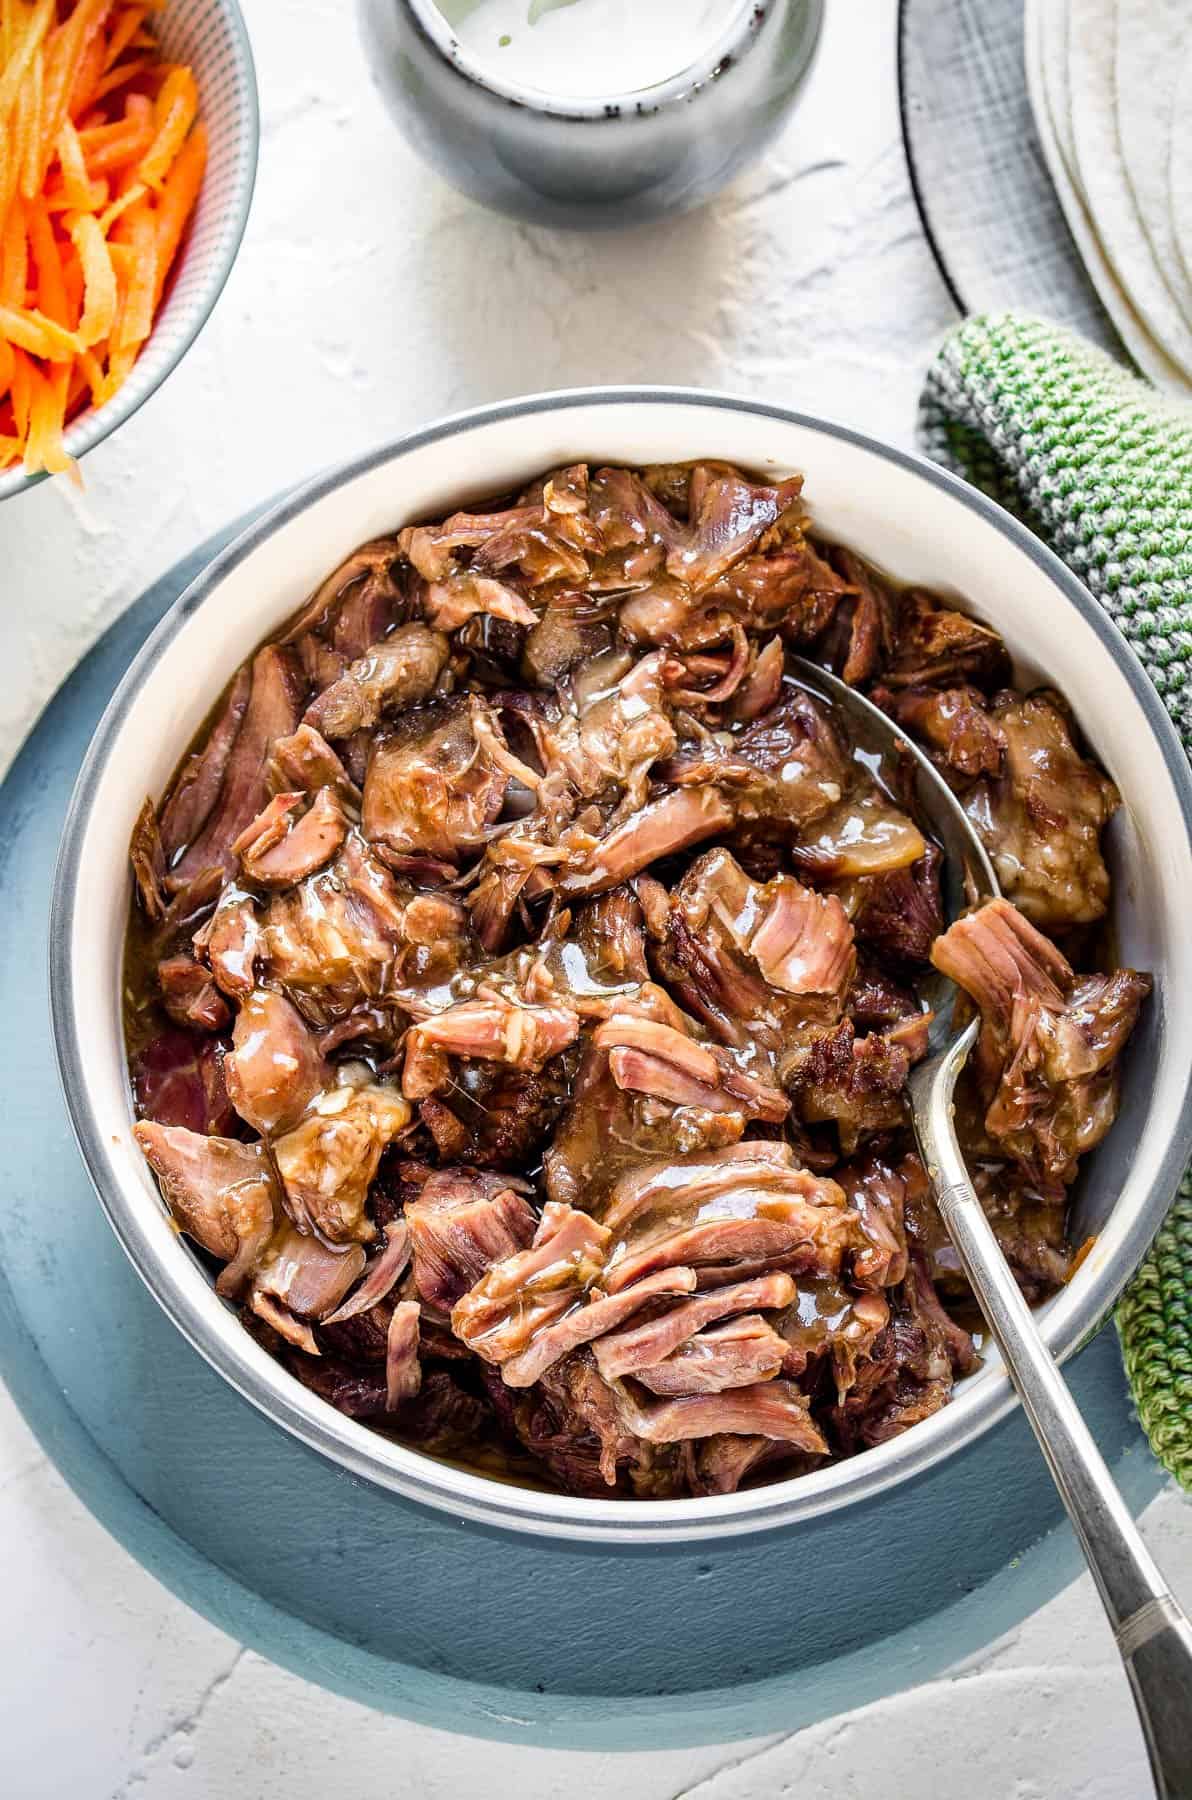 Saucy Korean BBQ beef in a bowl.